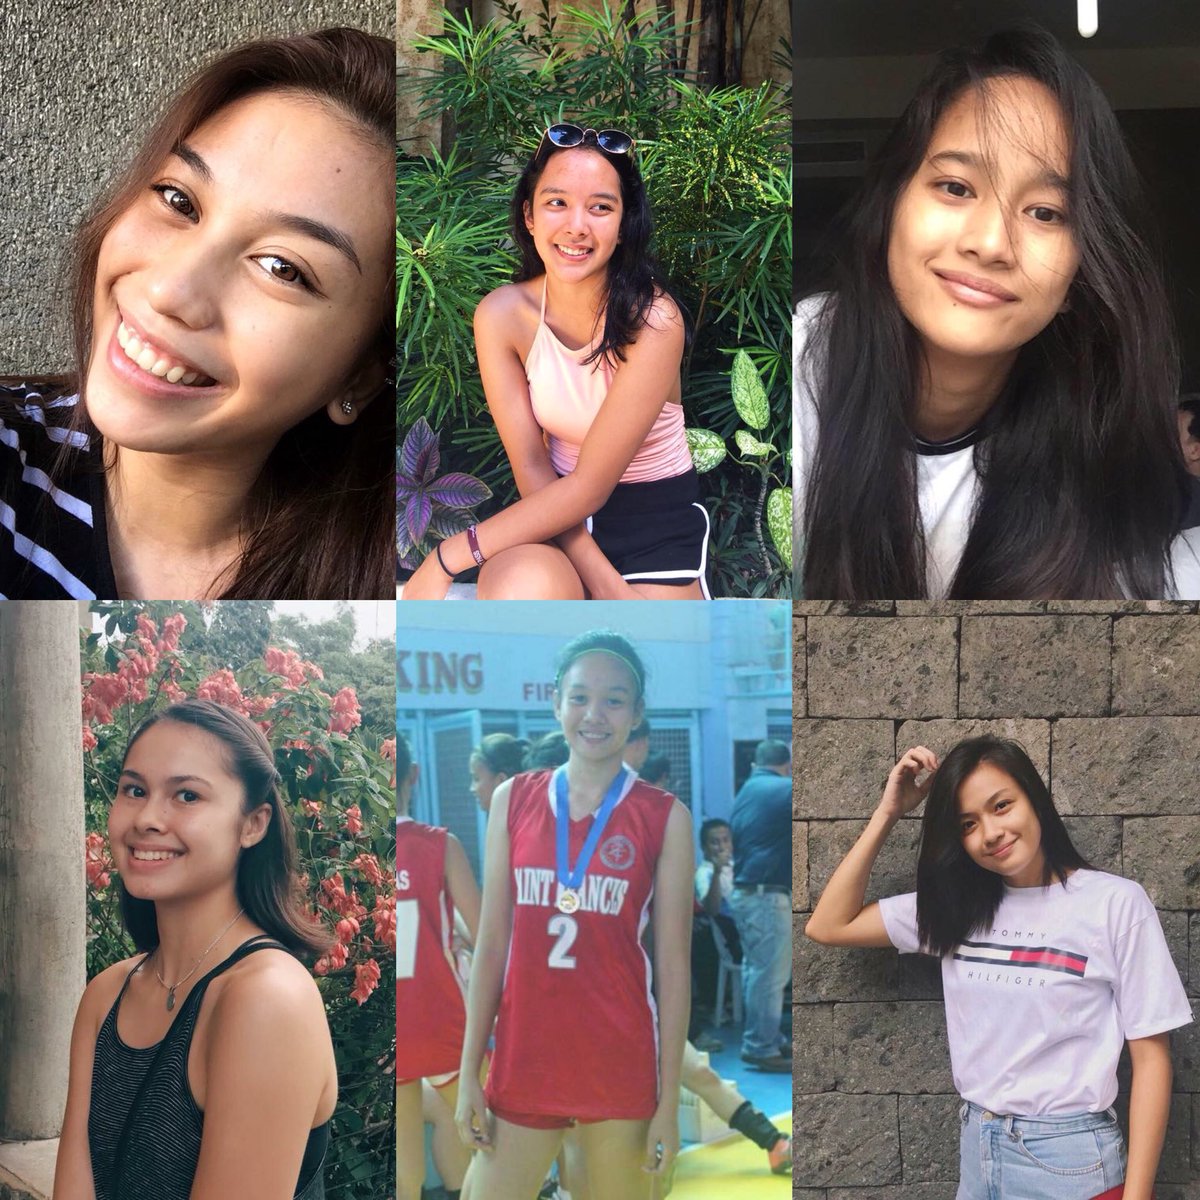 Today, a new chapter of your journey is about to start. May your stay in Ateneo mold you in becoming the best versions of yourselves! Welcome home rookies! Welcome to Ateneo! 💙🏐🦅

@_erikaraagas @belaaperaltaa @jayceeell3 @vanie_g @AriCuaresma7 @_ayumifurukawa 

#Batch2018
#OBF